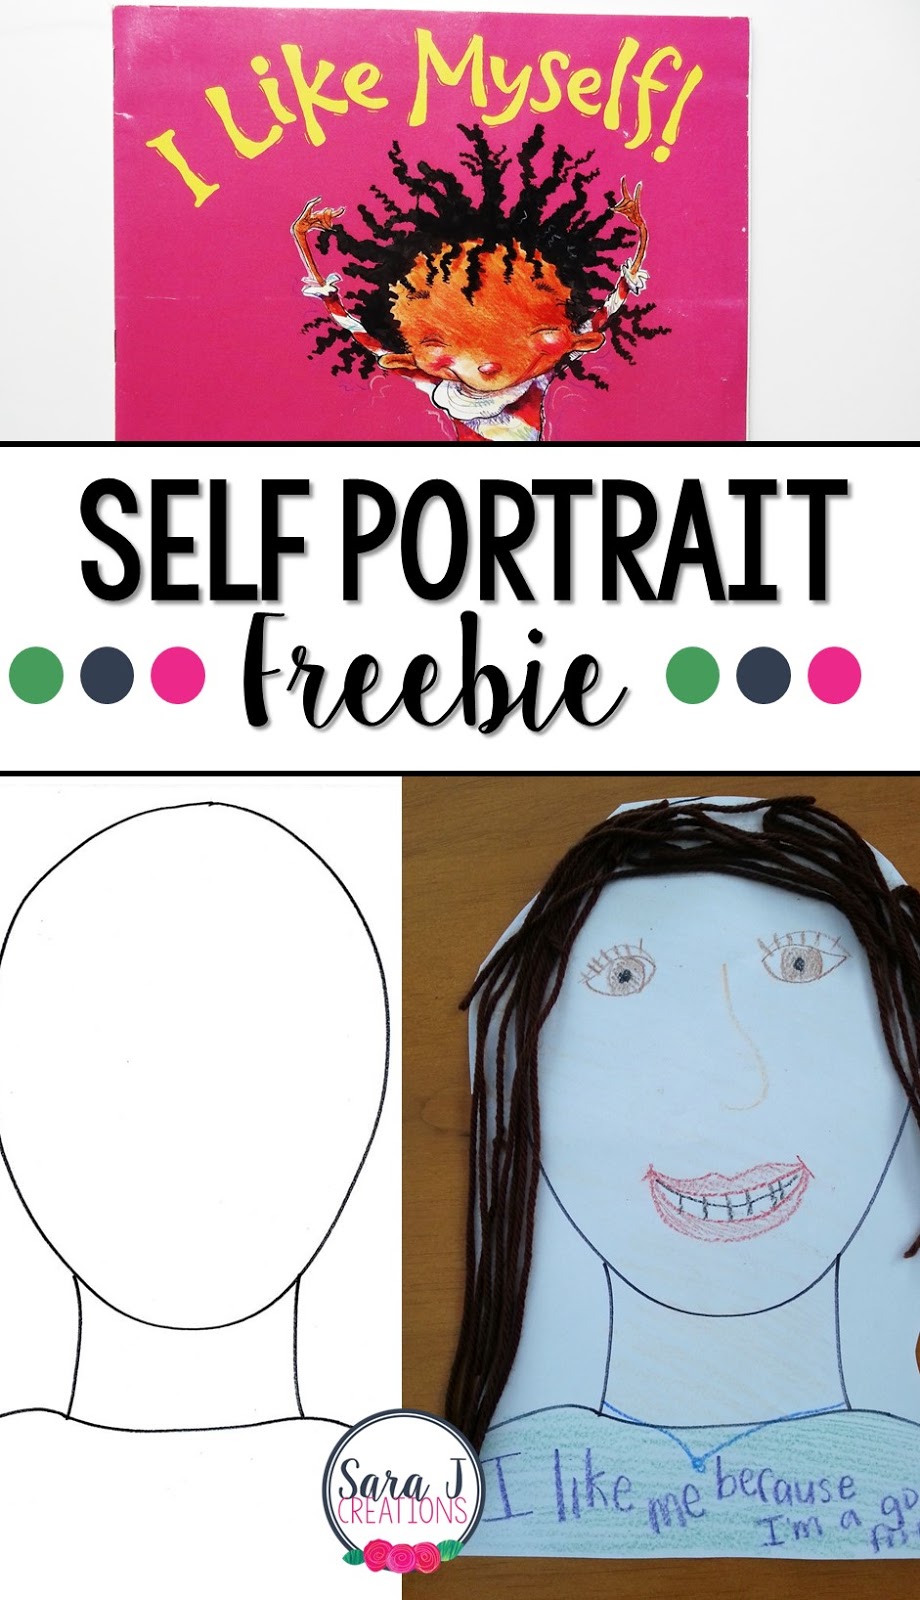 Easy idea for building self confidence and celebrating individuality in children. I love using this as a back to school activity for community building.